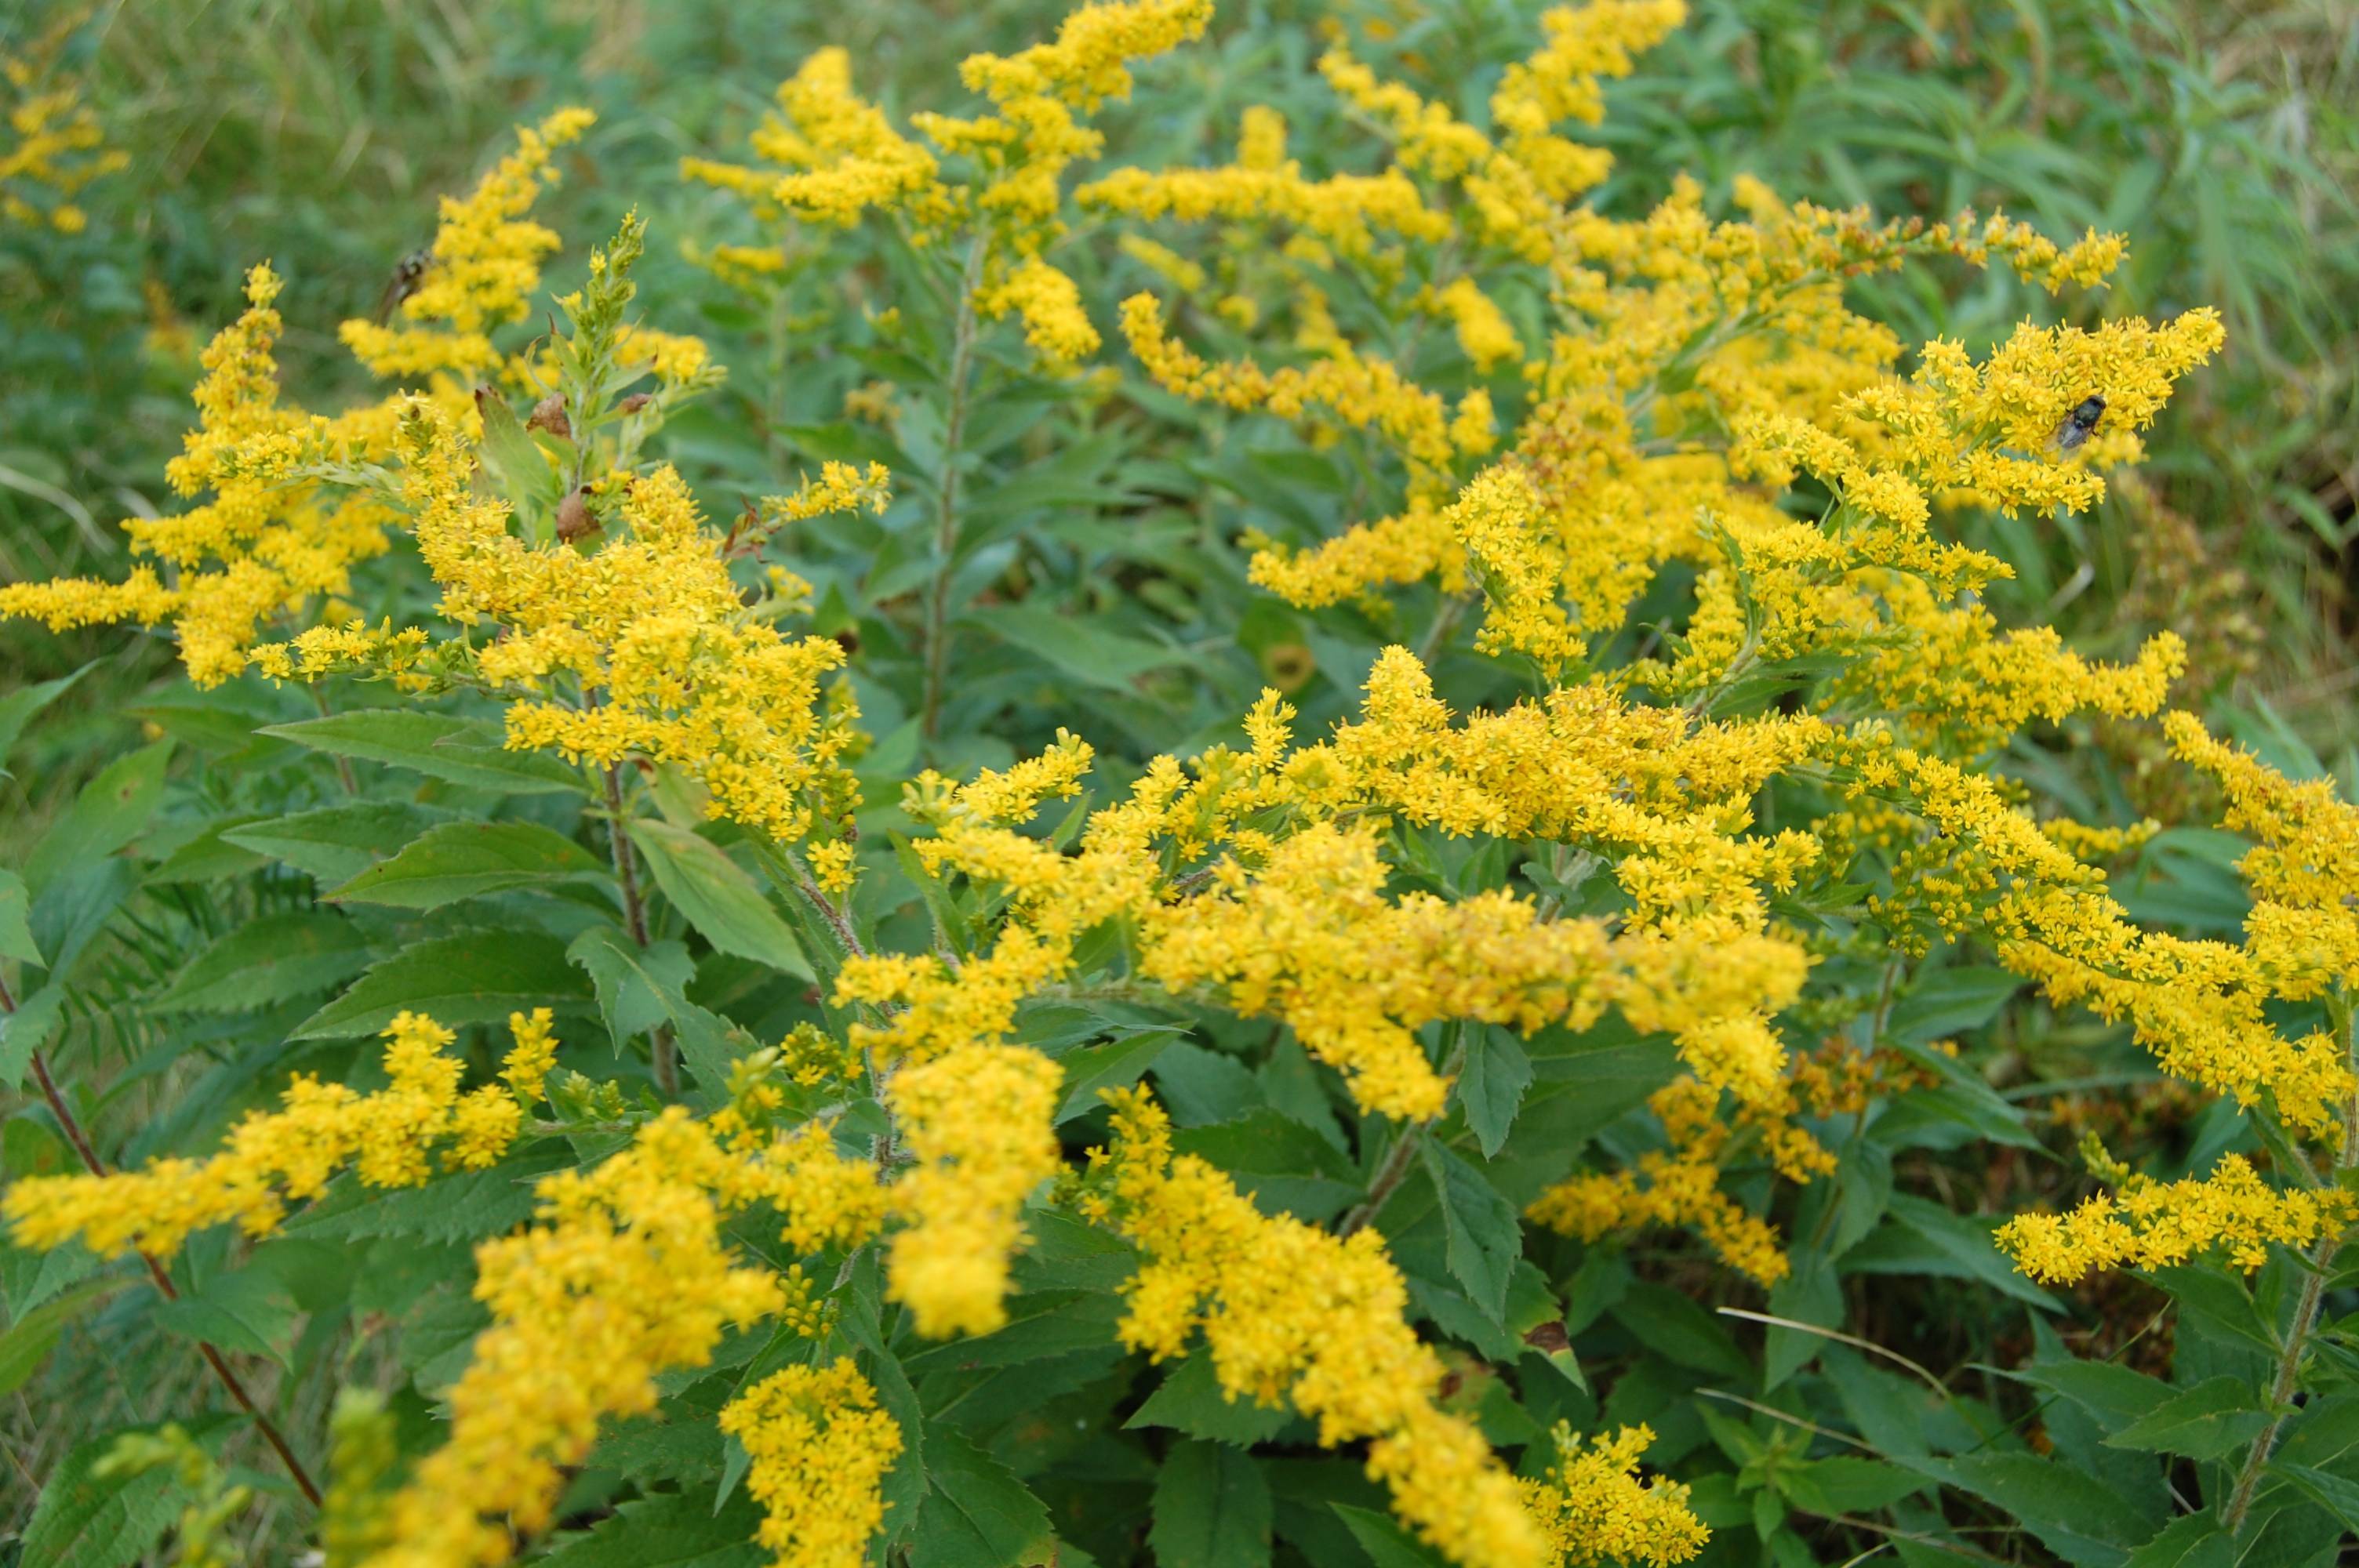 yellow flowers with green leaves and brown stems